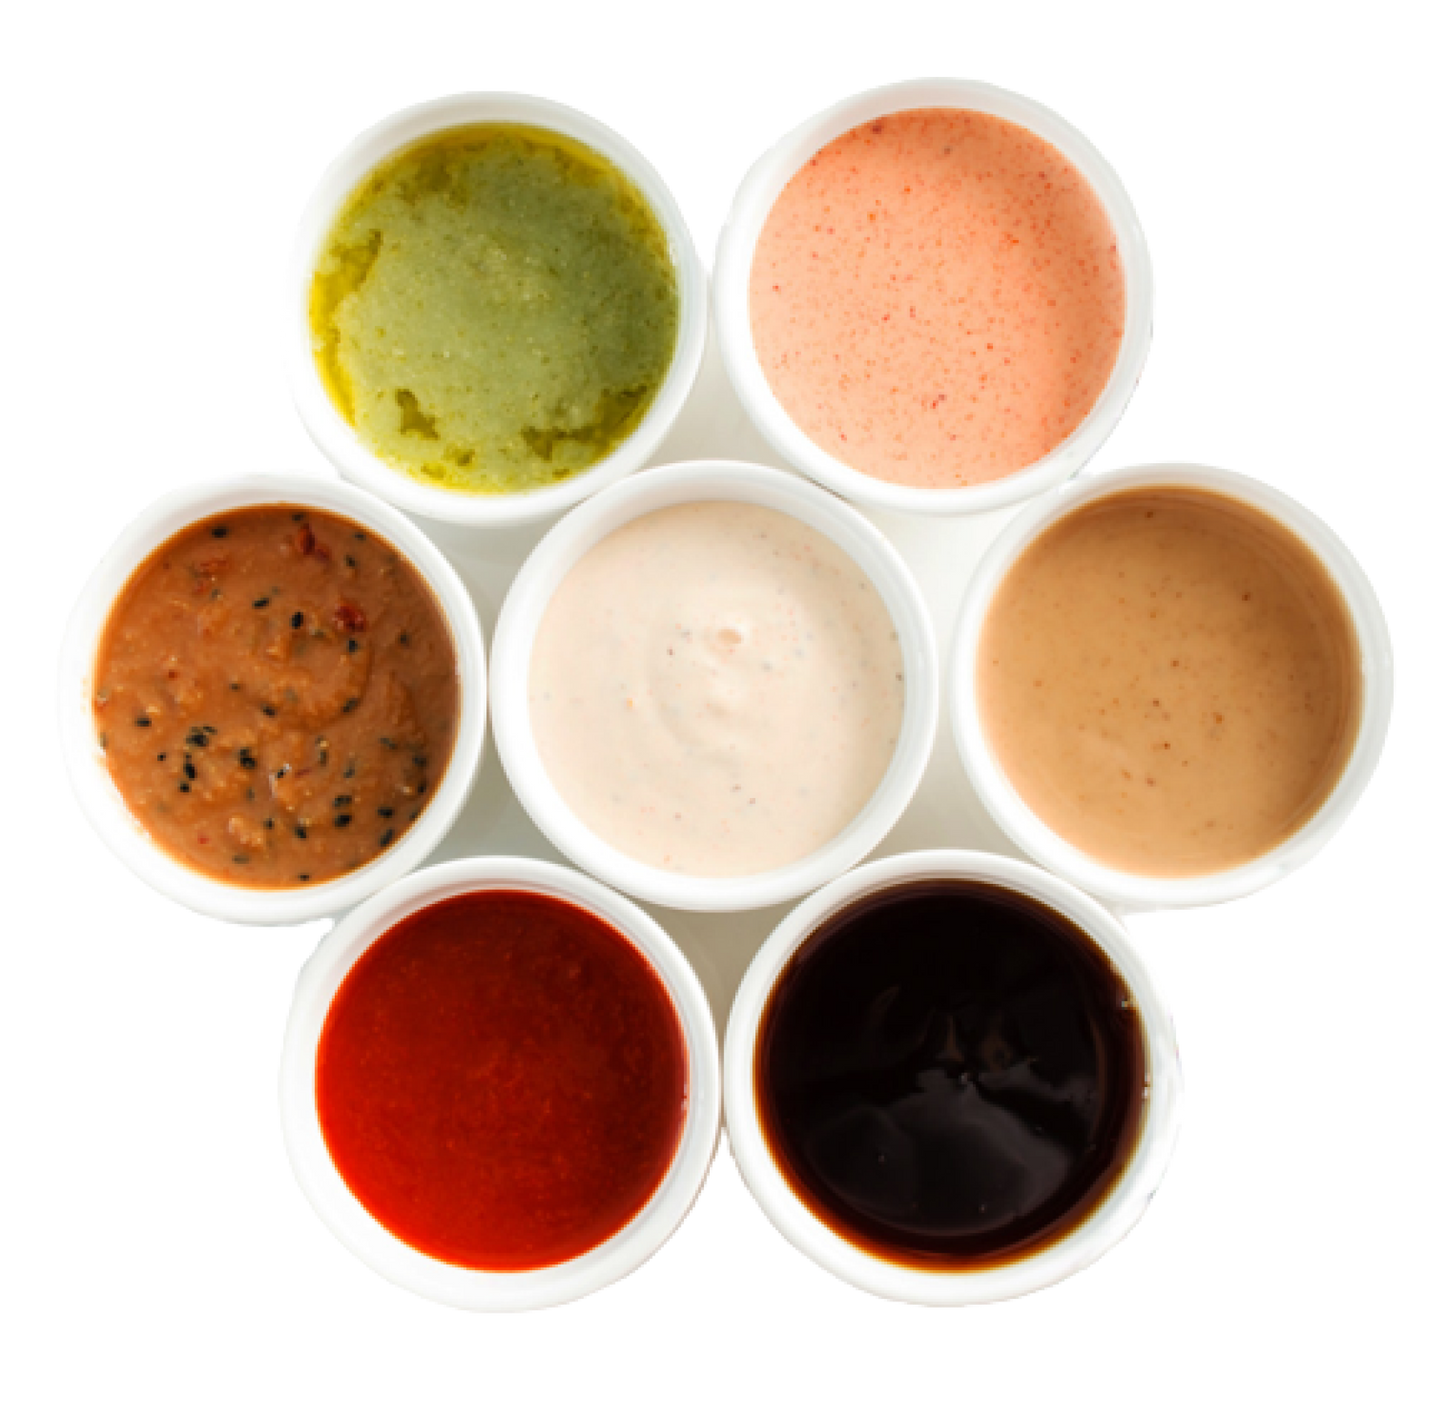 Additional Sauces